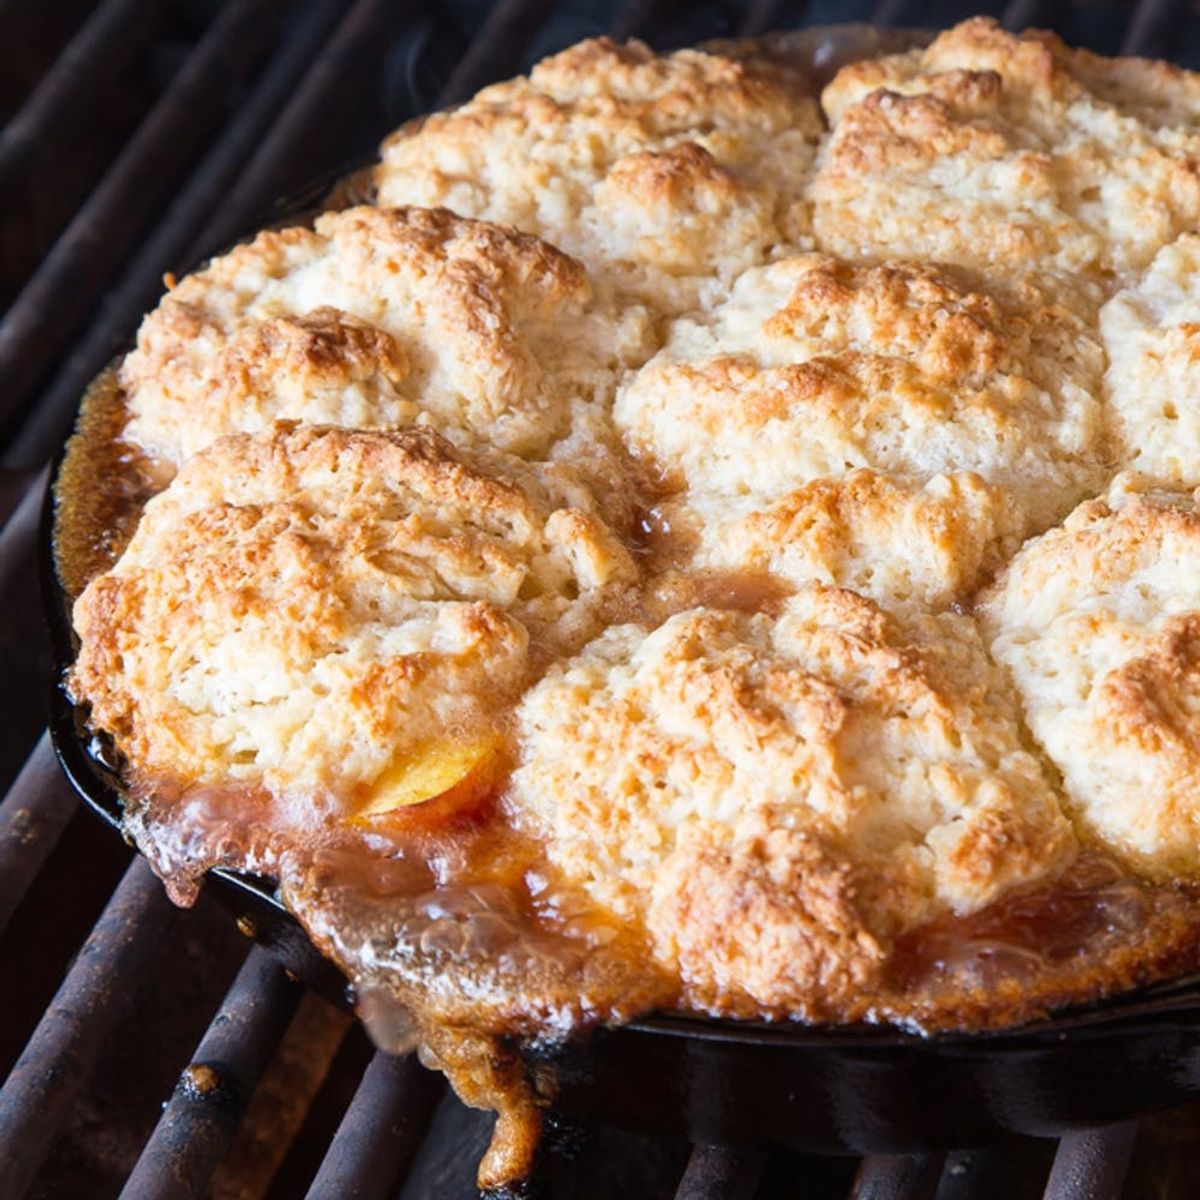 Up Your Glamping Game With Iron Skillet Campfire Peach Cobbler